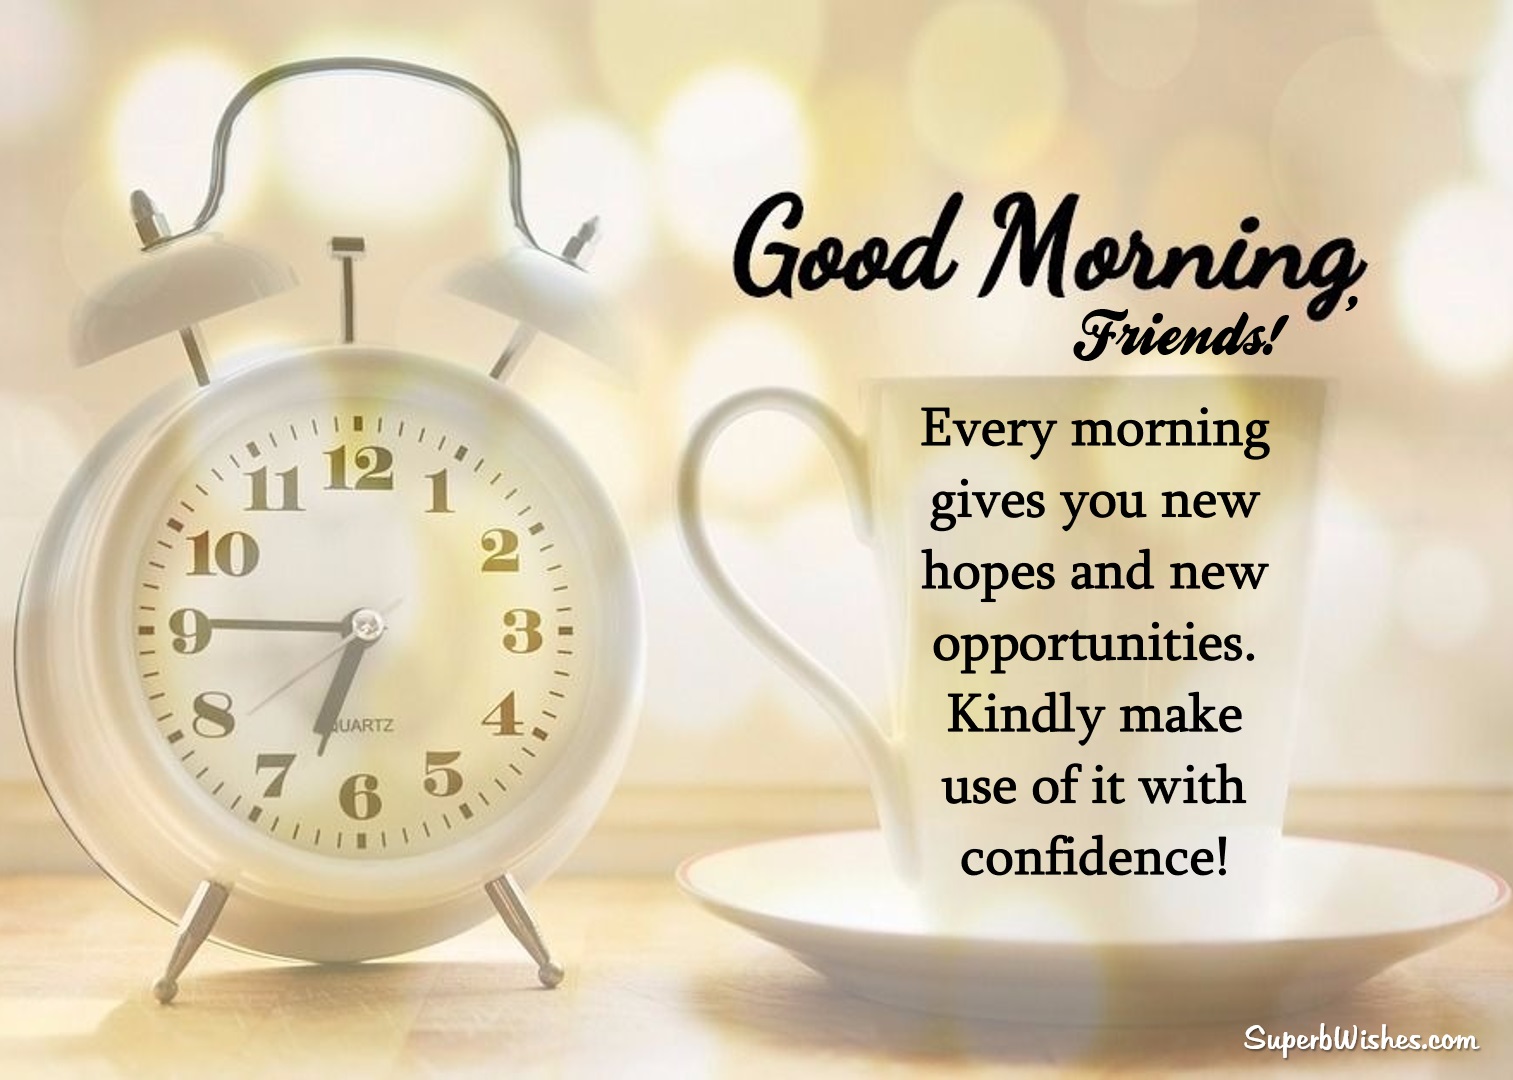 Good Morning Wishes For Friends Images – New Hopes | SuperbWishes.com